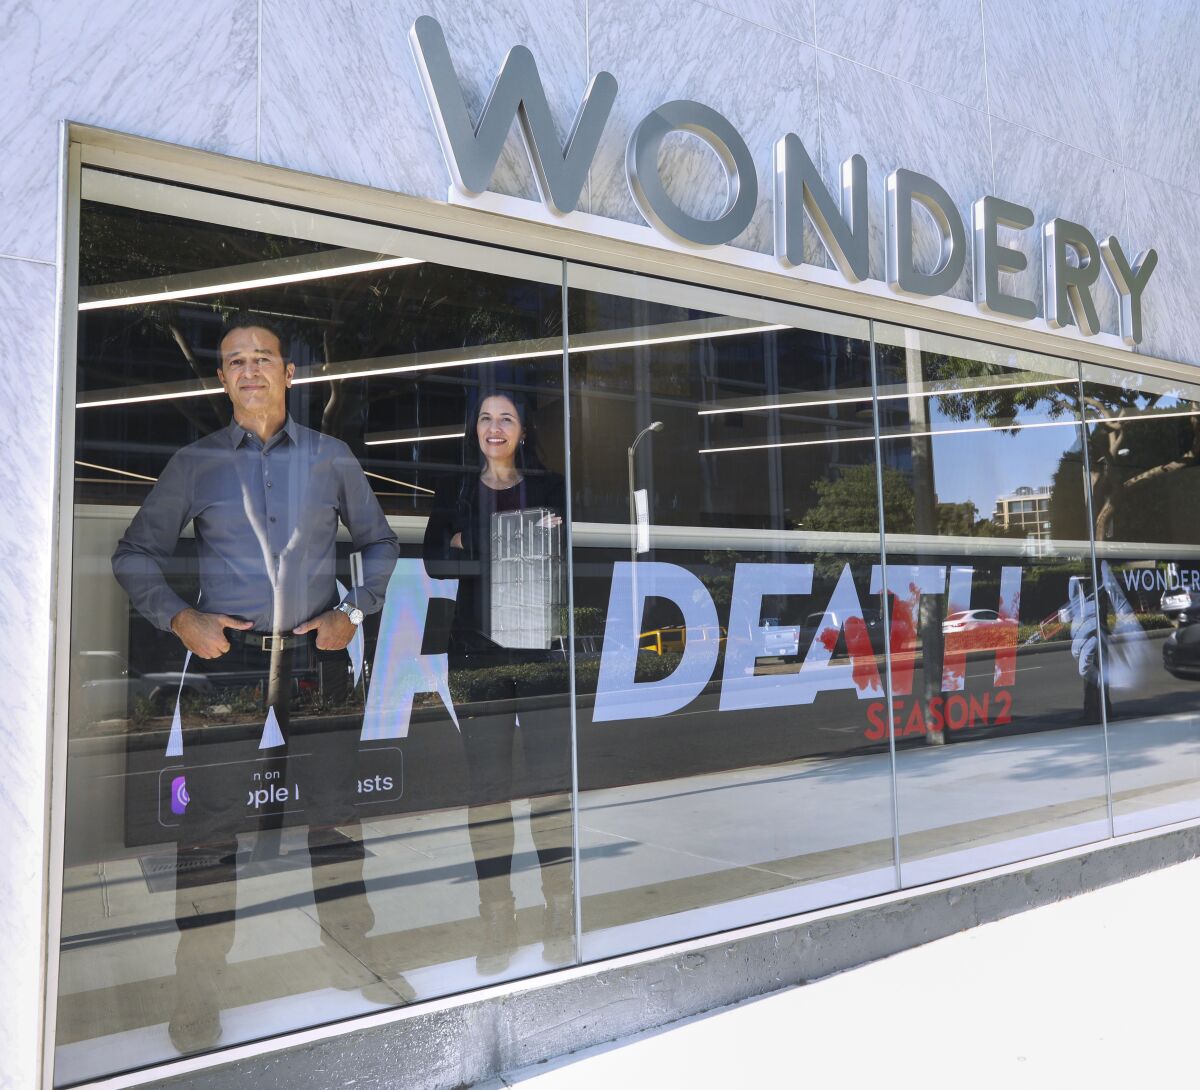 Hernan Lopez and Jen Sargent behind a display window of a building with Wondery above the window on the outside.